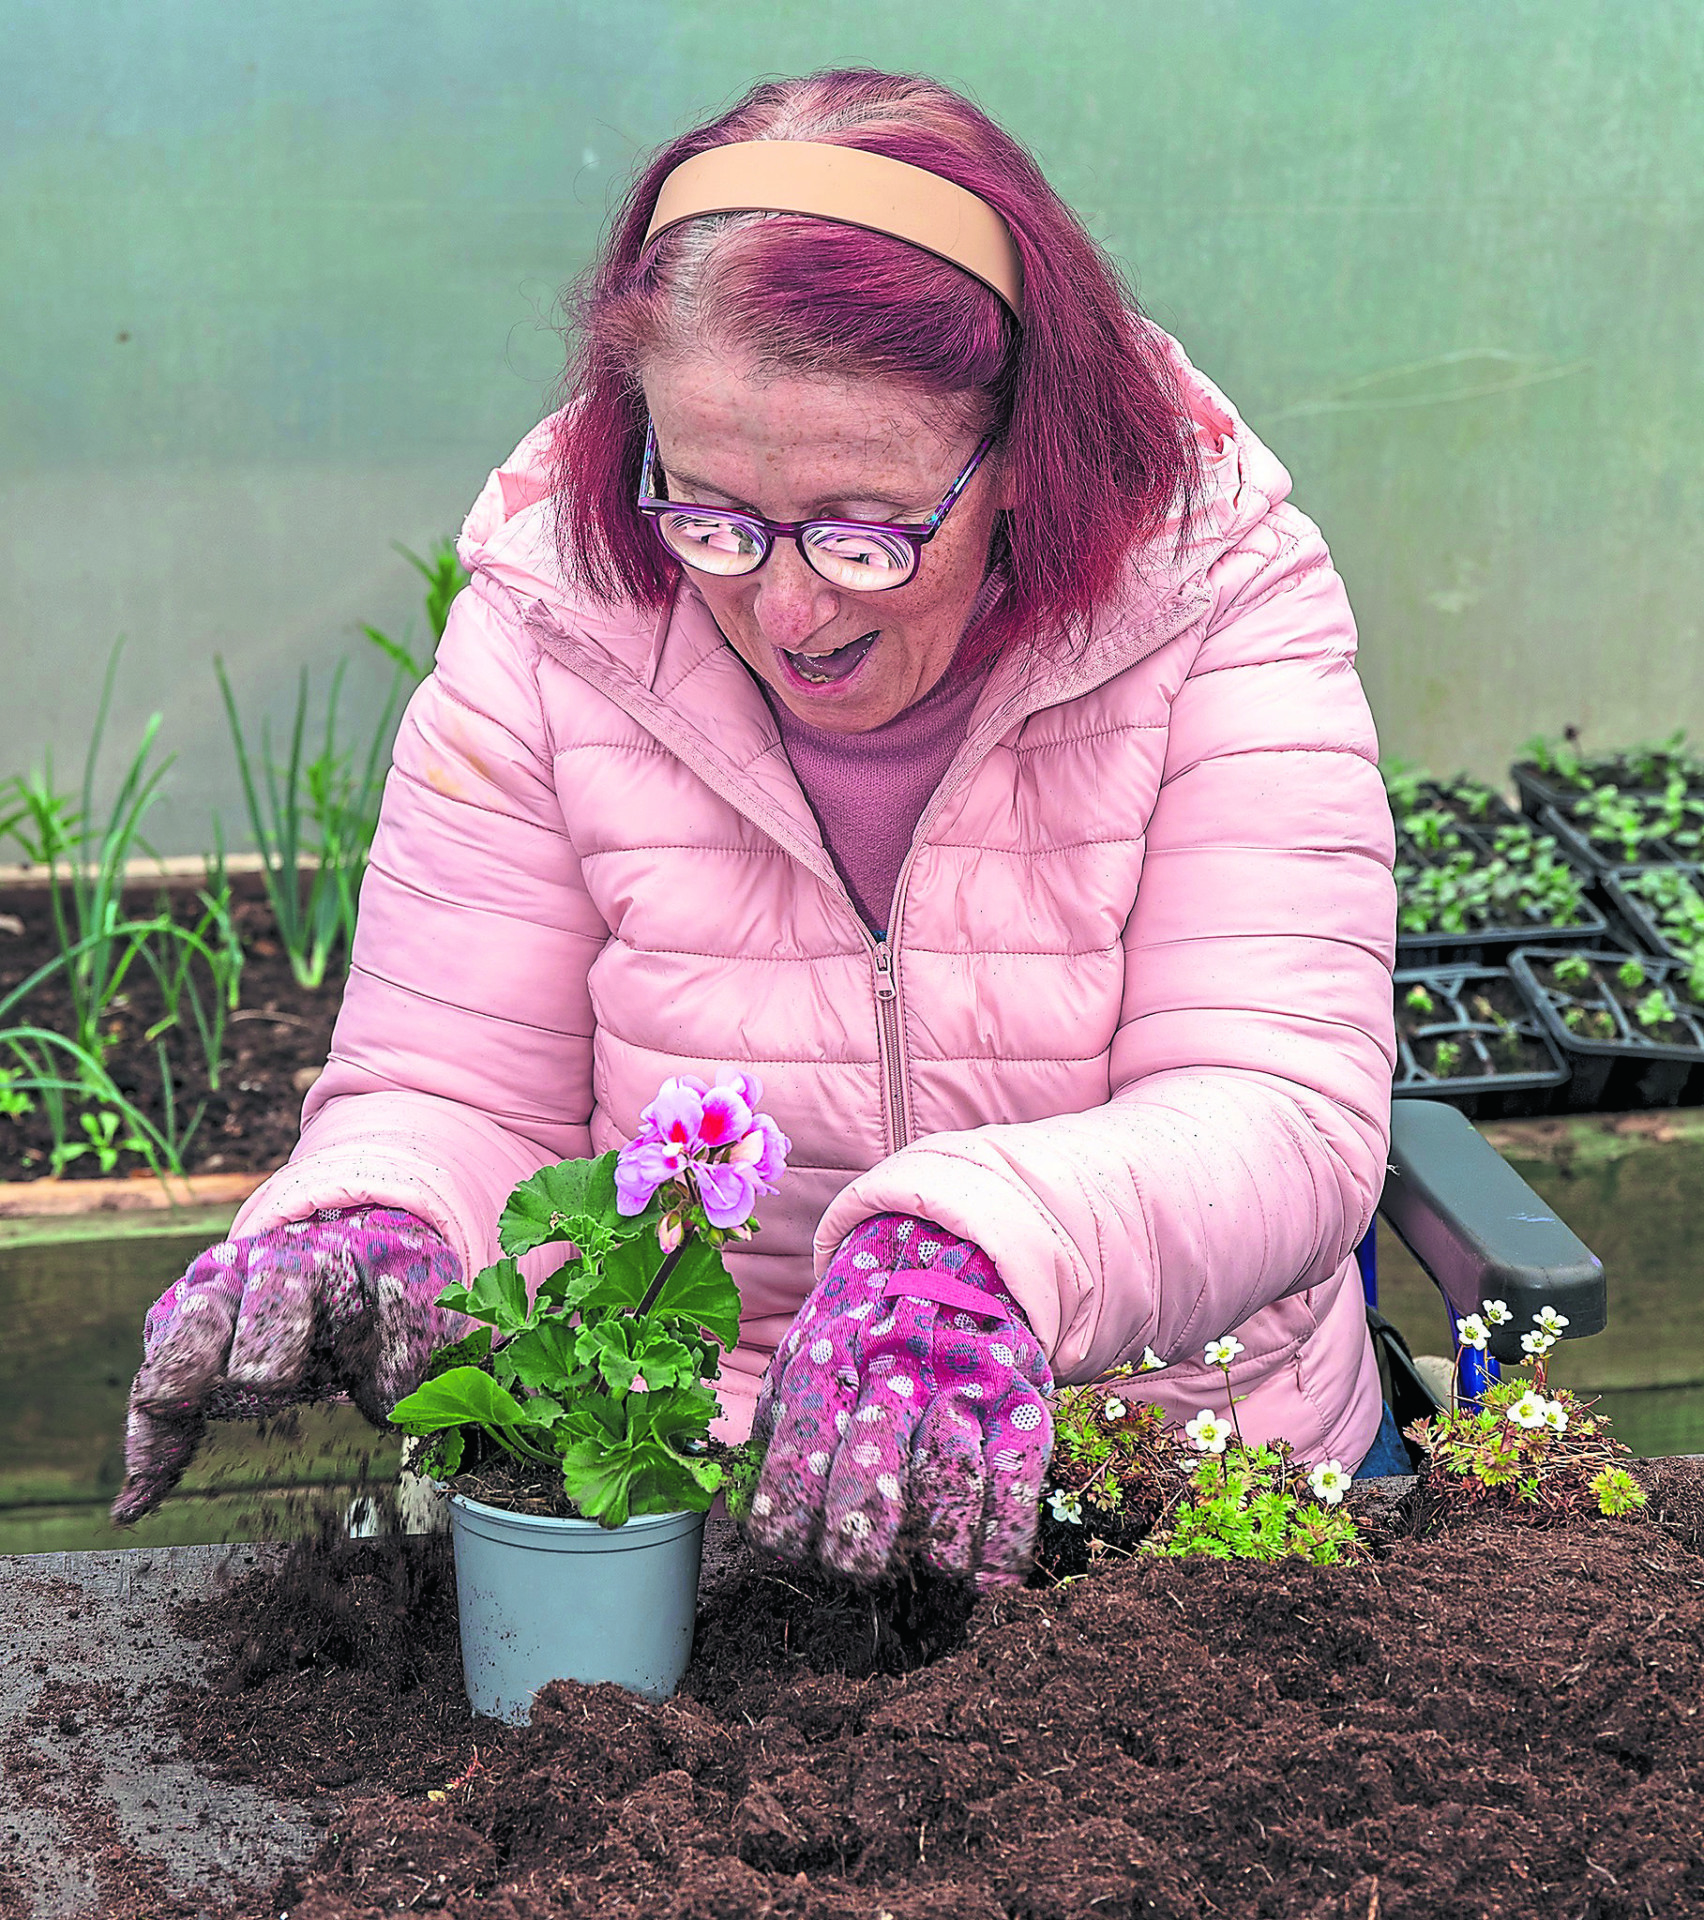 WATCH: Happiness blooms at local gardening group for disabled